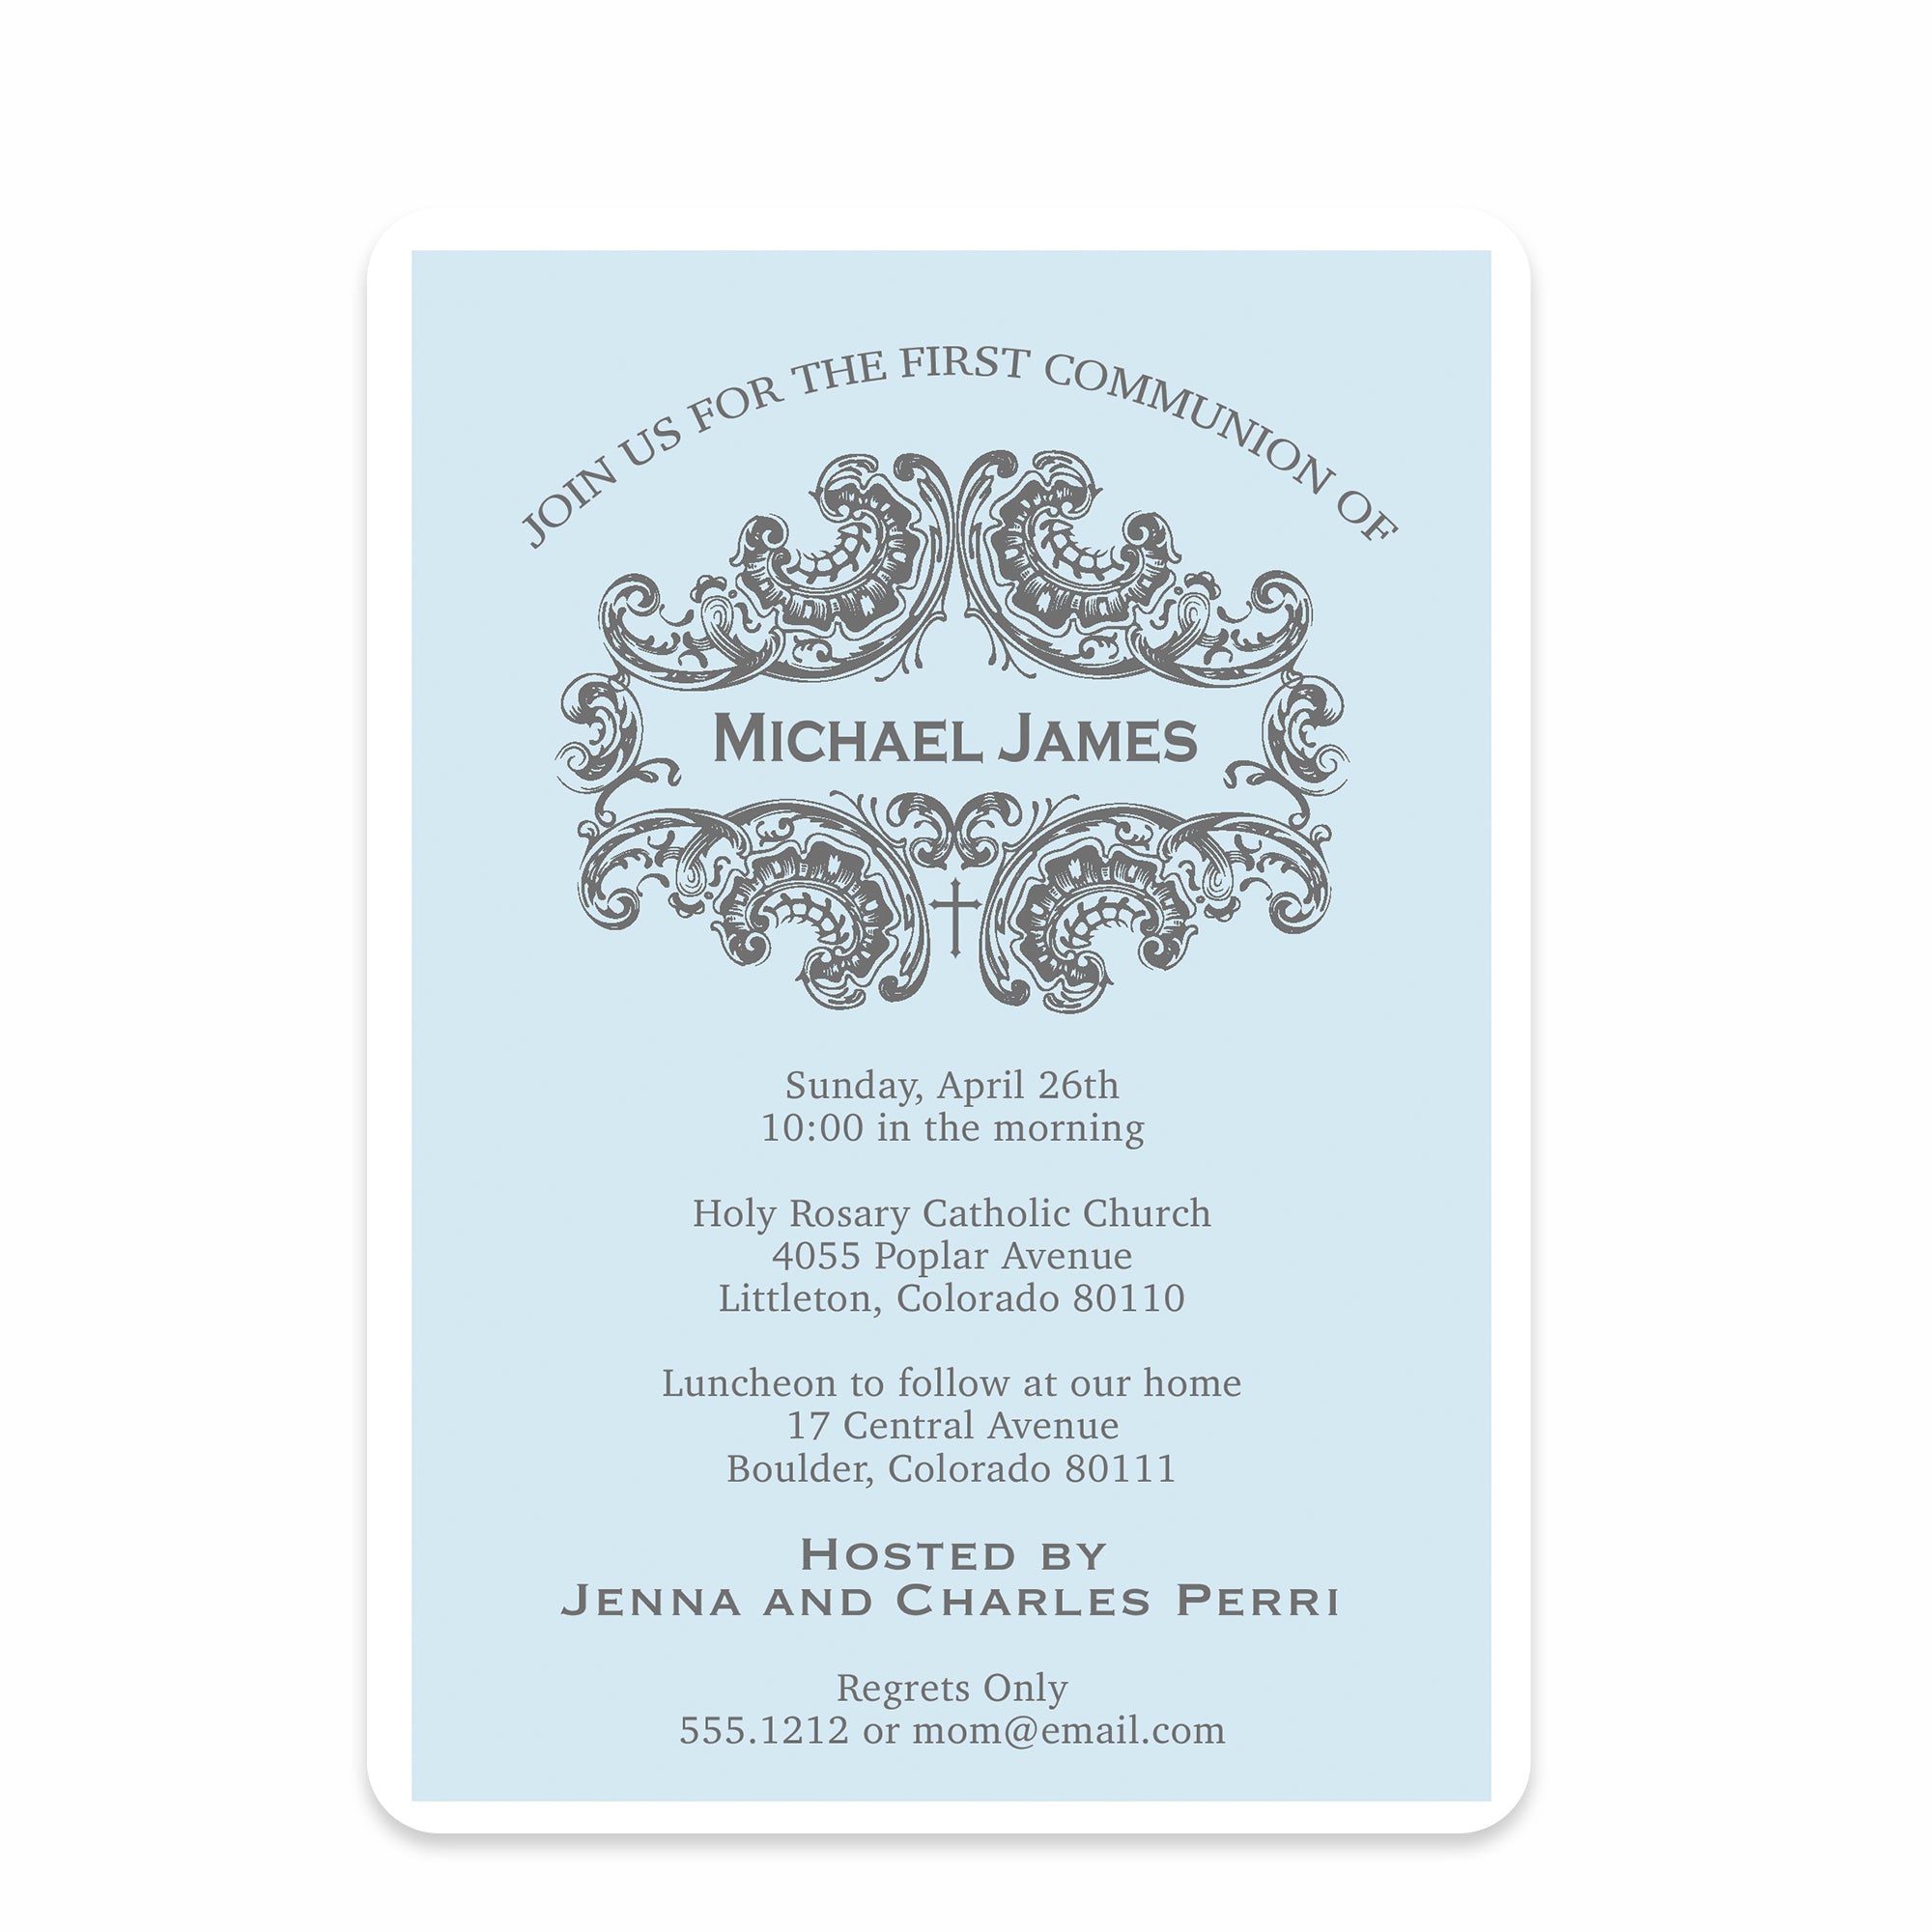 Elegant first communion invitation in blue and grey, printed on heavy cardstock, from Pipsy.com, front